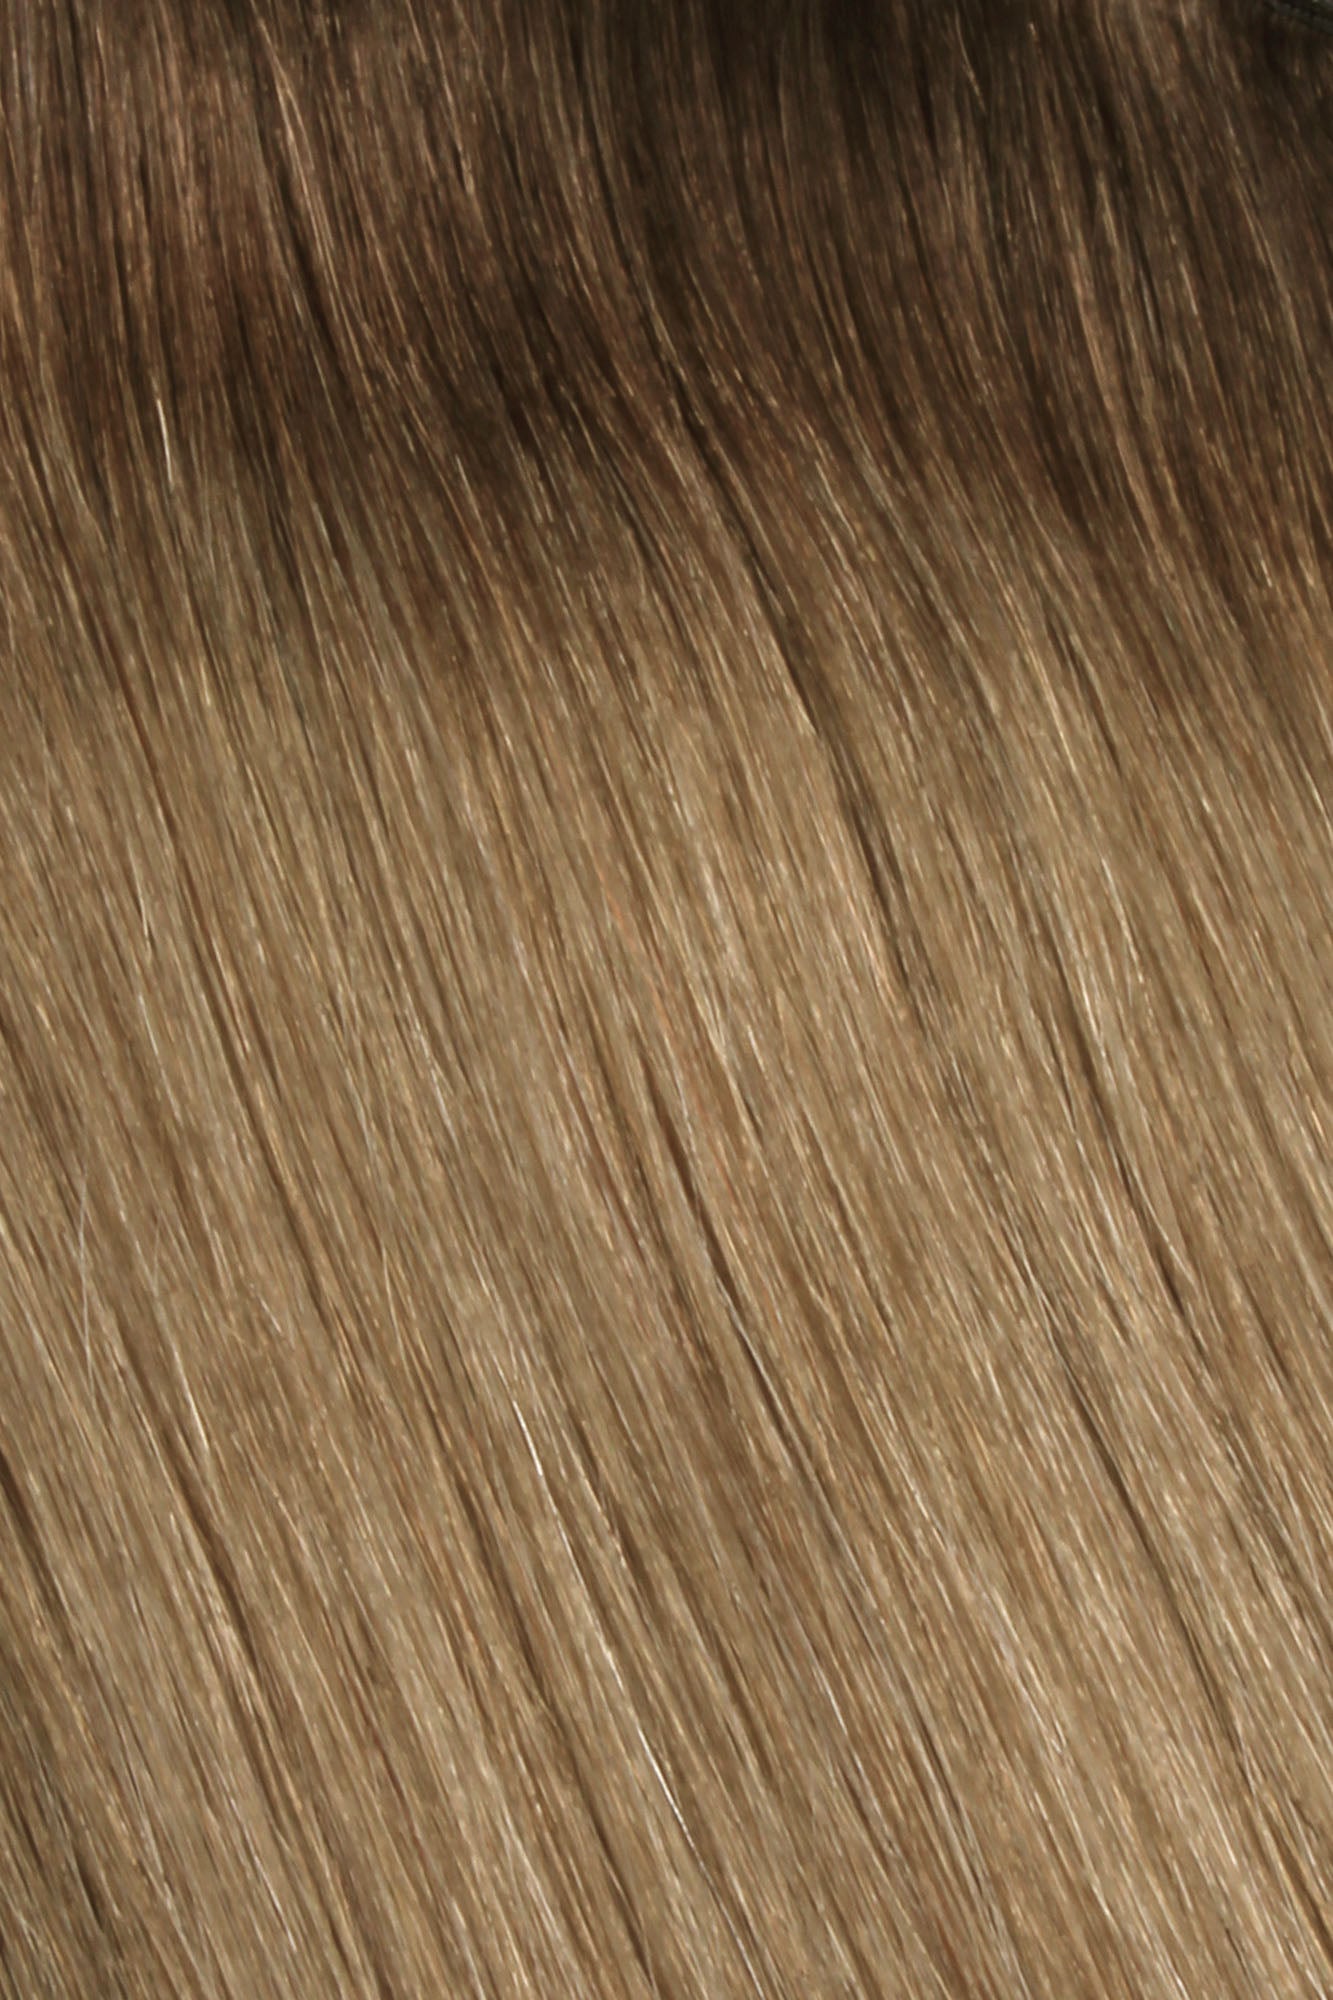 SEAMLESS® Flat Weft 22 Inches - SWAY Hair Extensions Rooted-Champagne-Chestnut-R5-8-22 Natural SEAMLESS® Flat Weft 22 Inches extensions. Thin, flexible, and discreet. 100% Double Drawn Remy Human Hair. Versatile and reusable